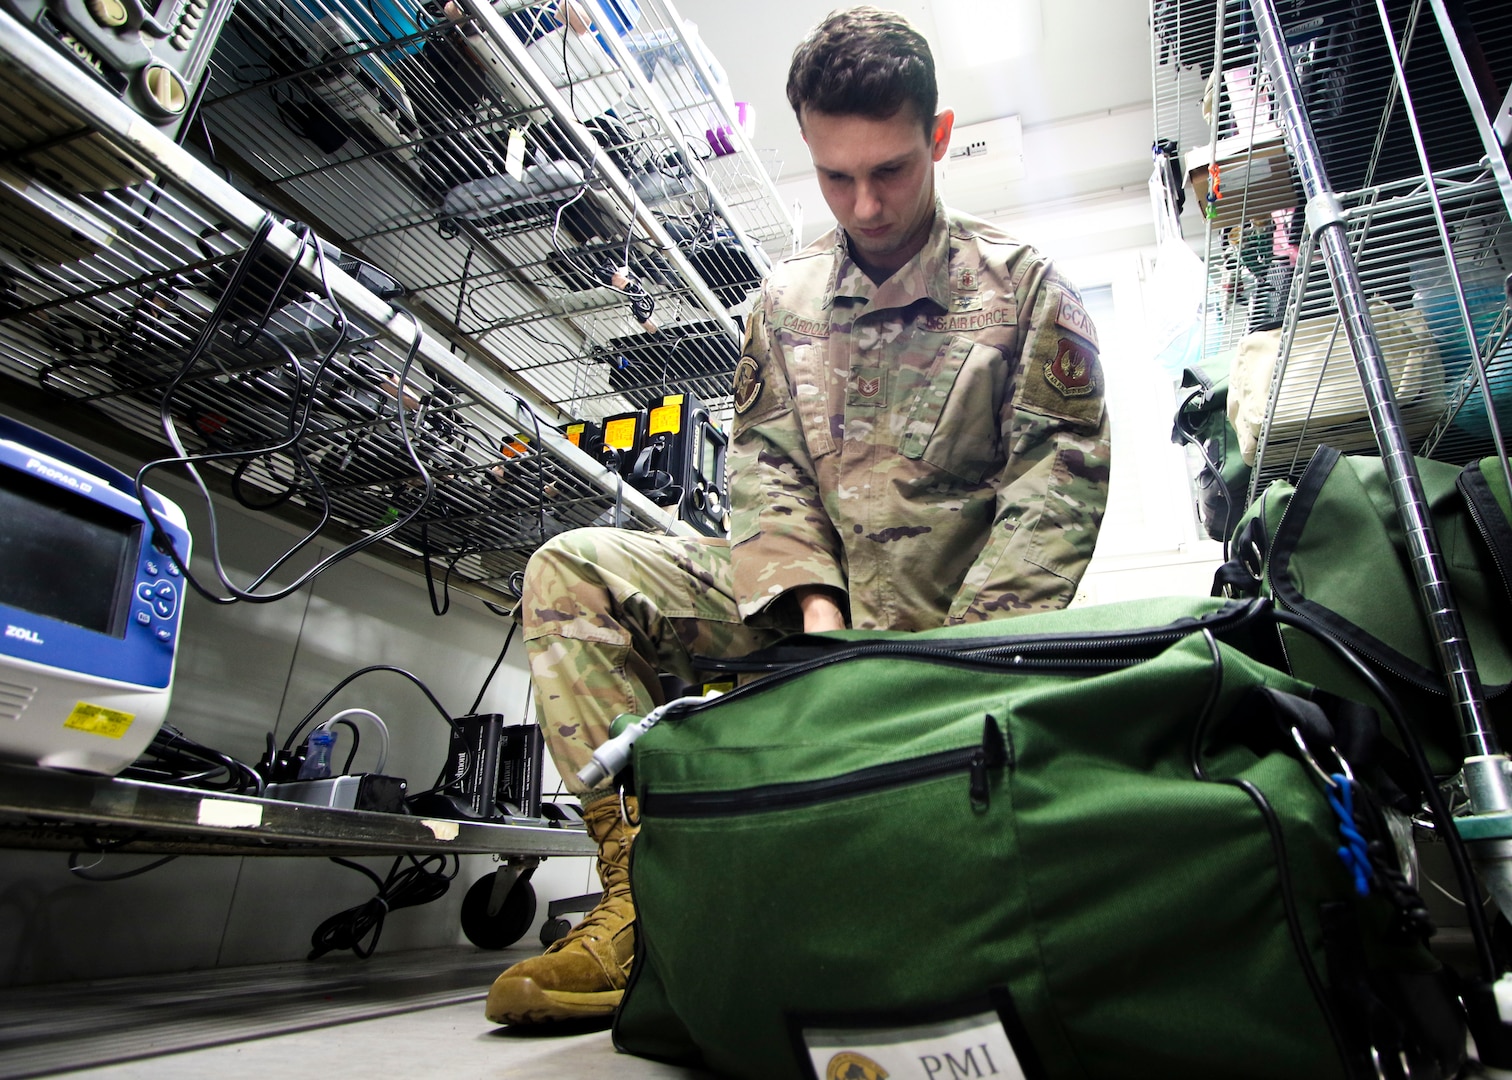 U.S. Air Force Tech Sgt. Adam Cardoza, Noncommissioned Officer in charge, Pulmonary Clinic, Landstuhl Regional Medical Center, performs a preflight inspection on equipment as part of the 86th Medical Squadron’s Critical Care Air Transport Team operations, March 23. Cardoza, a native of Dana Point, California, was recognized as the Air Force’s top Cardiopulmonary Laboratory Noncommissioned Officer of the Year of 2020.